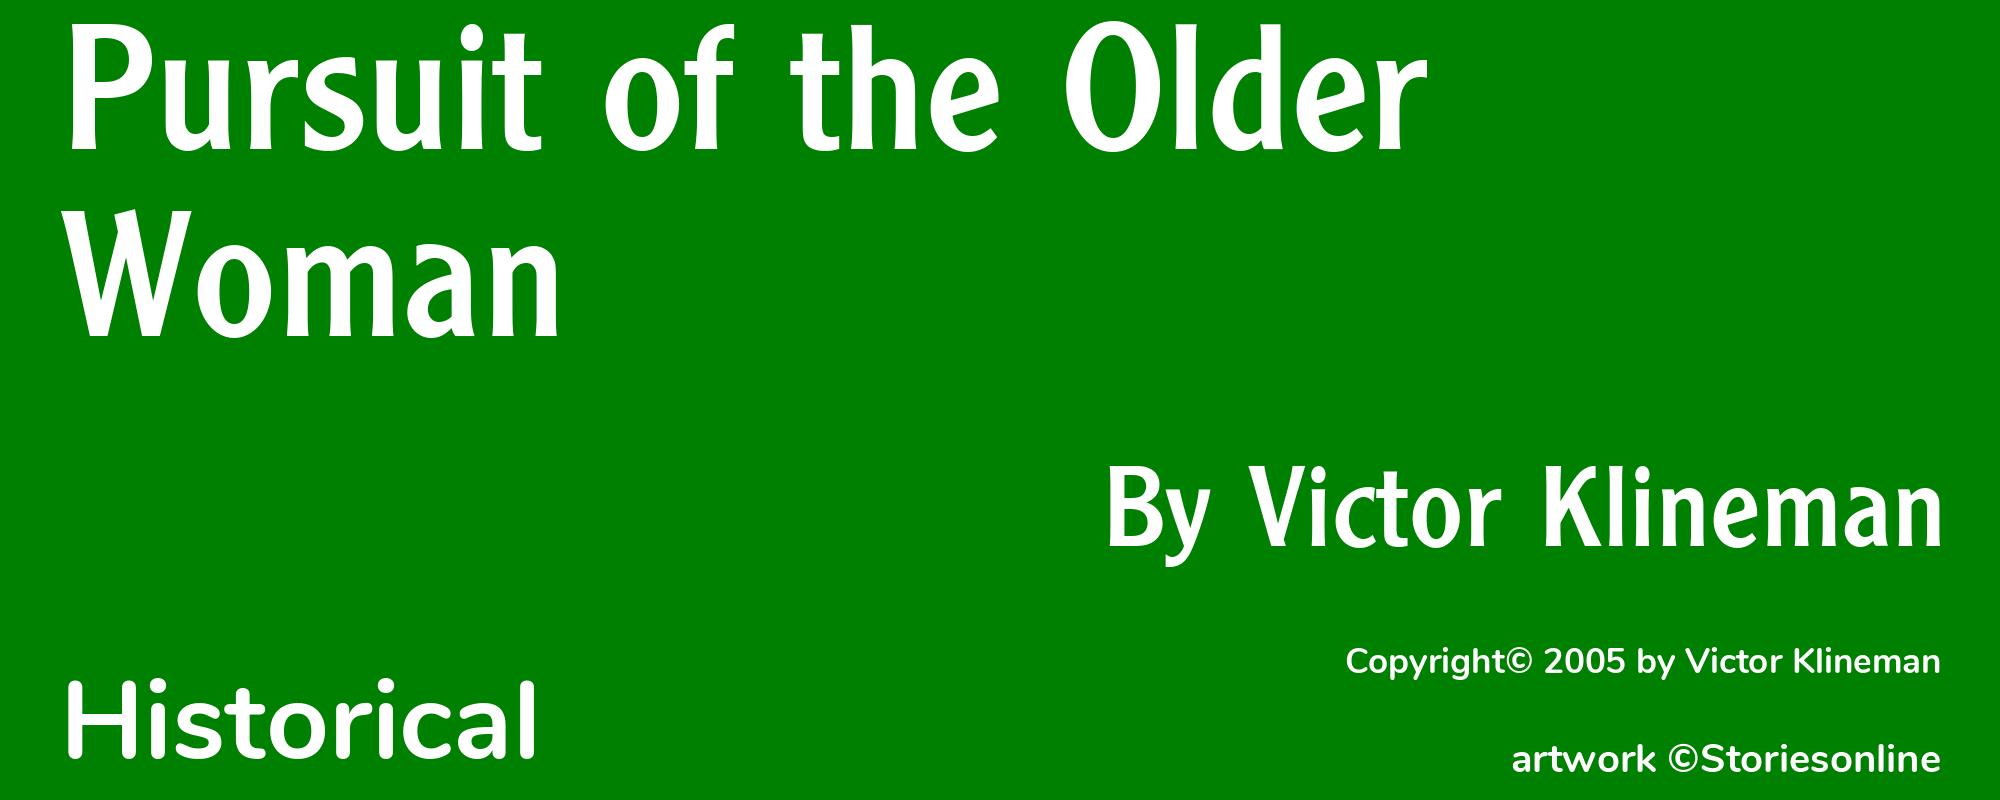 Pursuit of the Older Woman - Cover